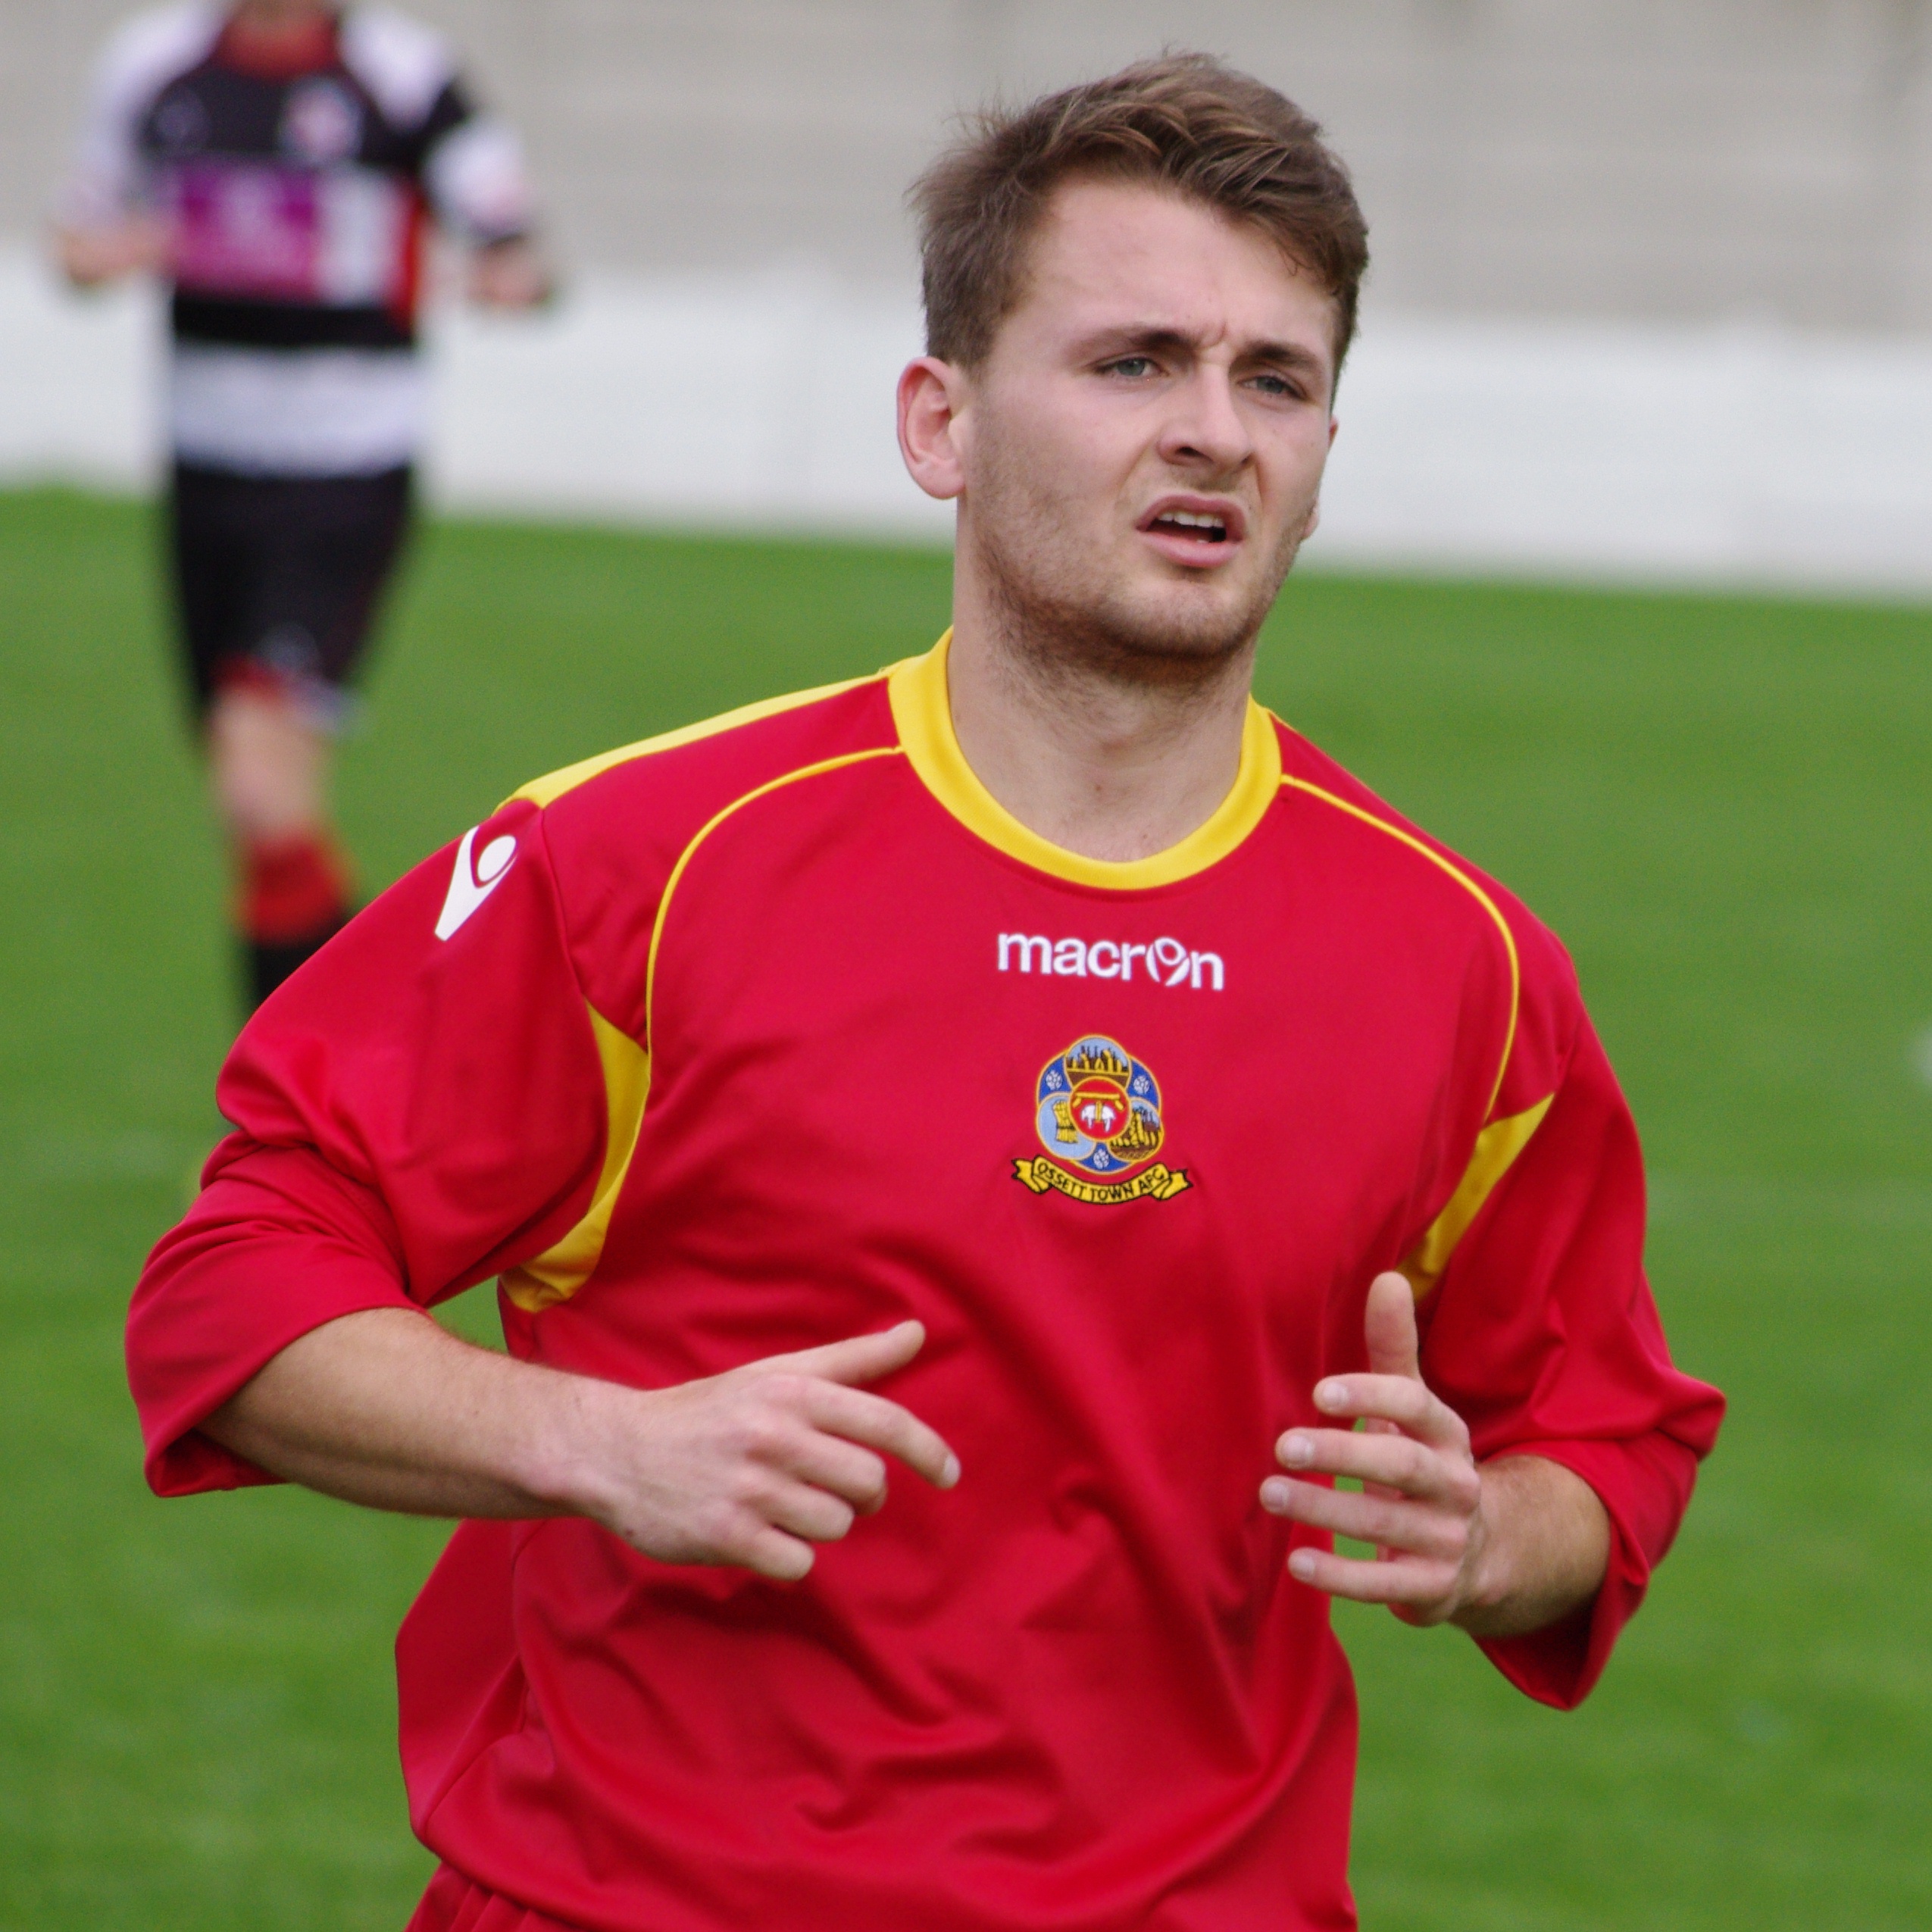 Jimmy Eyles has decided to sign for Toolstation NCEL Premier Division side Shaw Lane Aquaforce